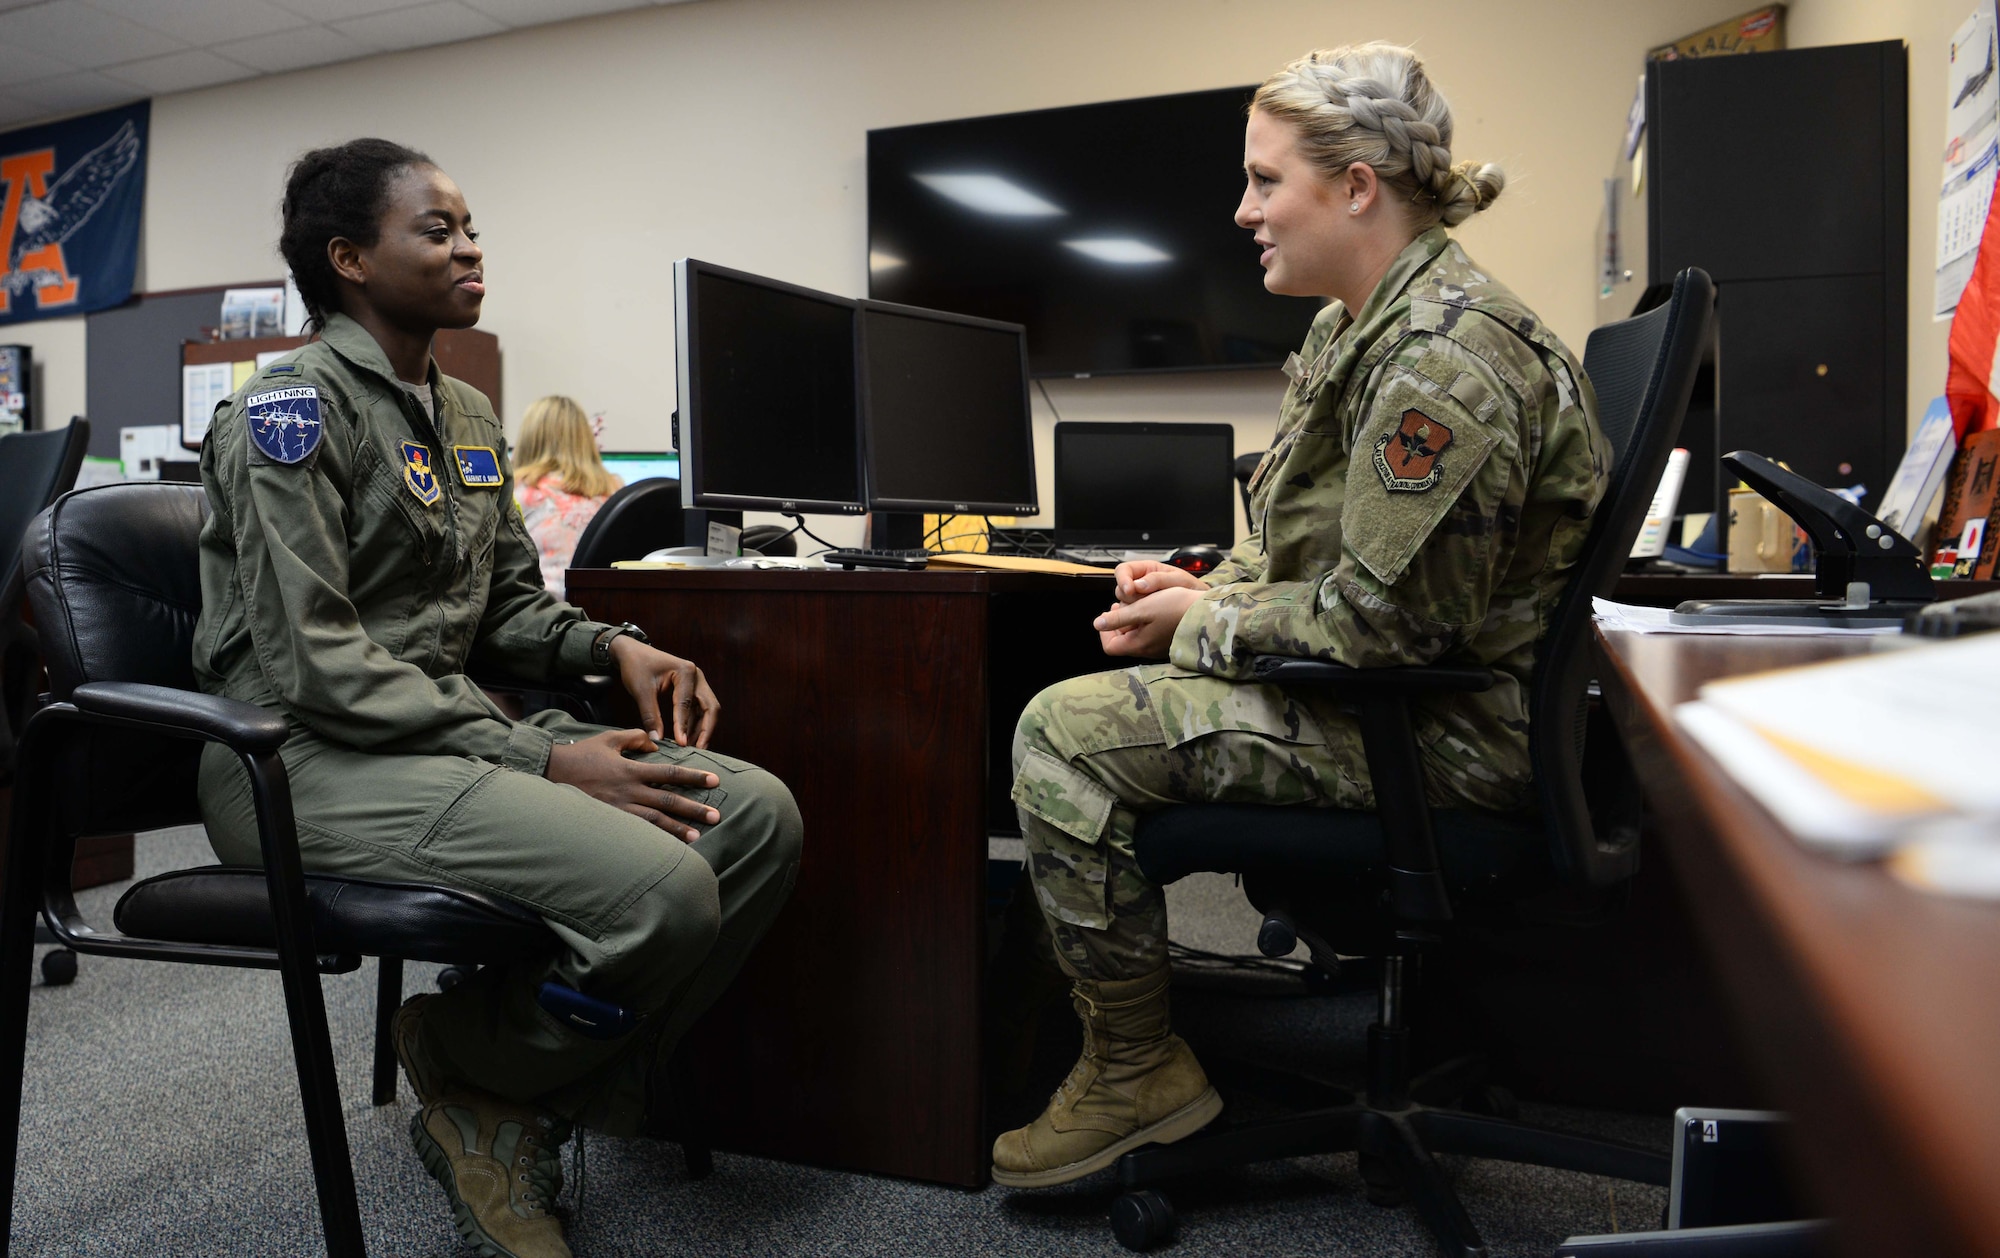 Capt. Christy Martin (right), 14th Student Squadron international military student officer, and 1st Lt. Sanni Kafayat (left), a student pilot from Nigeria, discuss Kafayat’s return home July 26, 2019, at Columbus Air Force Base, Mississippi. The IMSO is tasked with managing the administrative part of an international student’s training. (U.S. Air Force photo by Airman 1st Class Jake Jacobsen